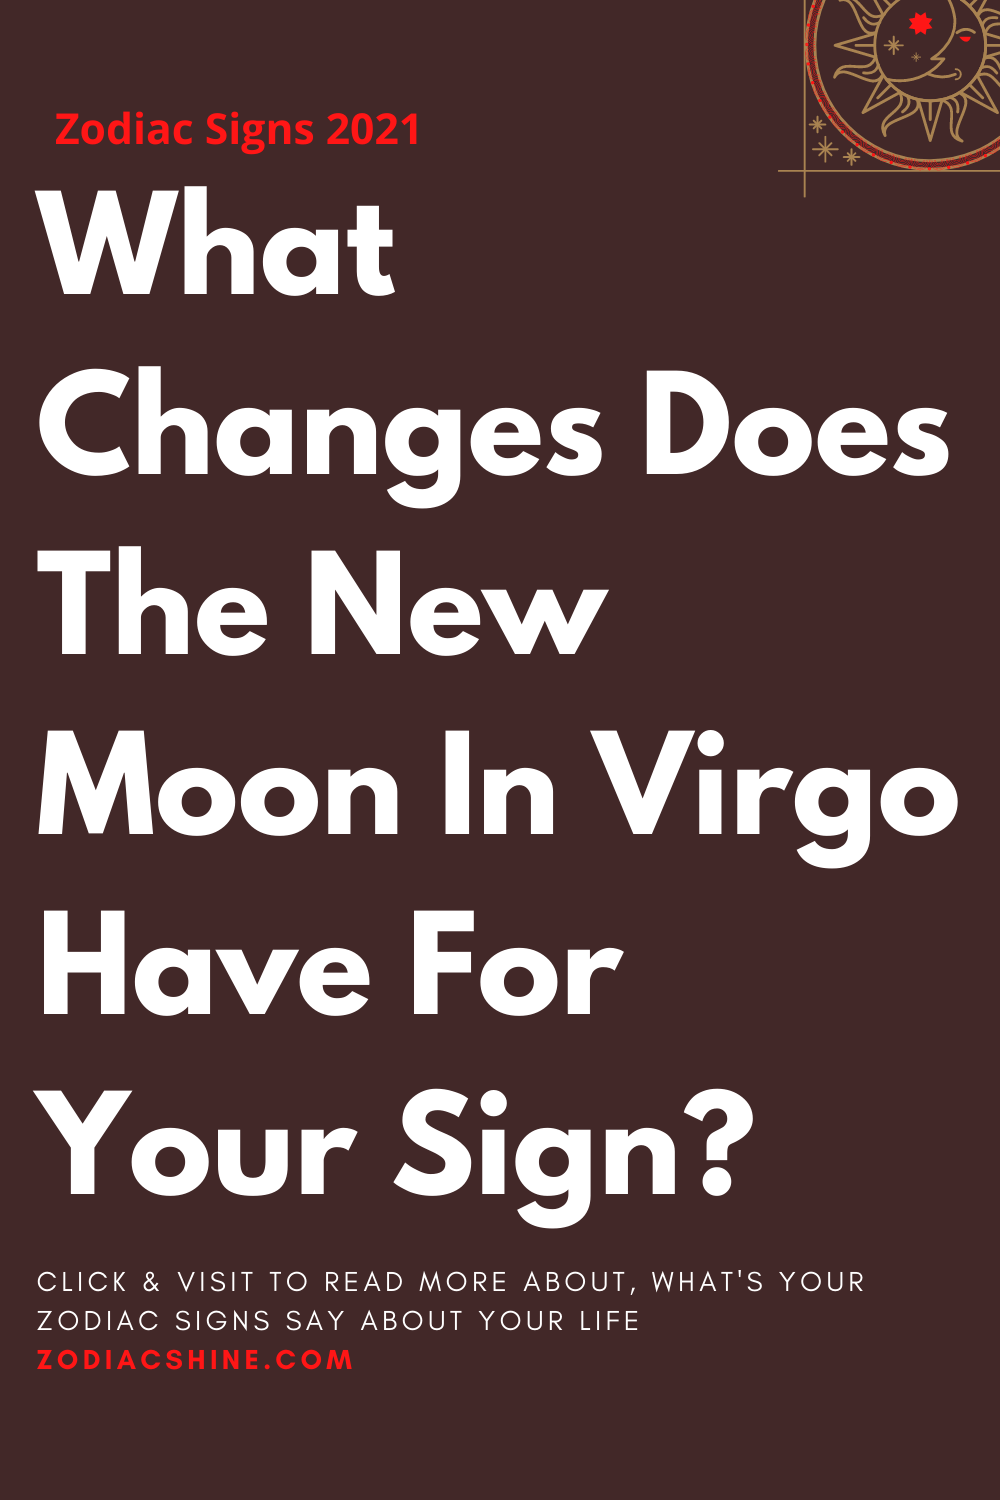 What Changes Does The New Moon In Virgo Have For Your Sign?